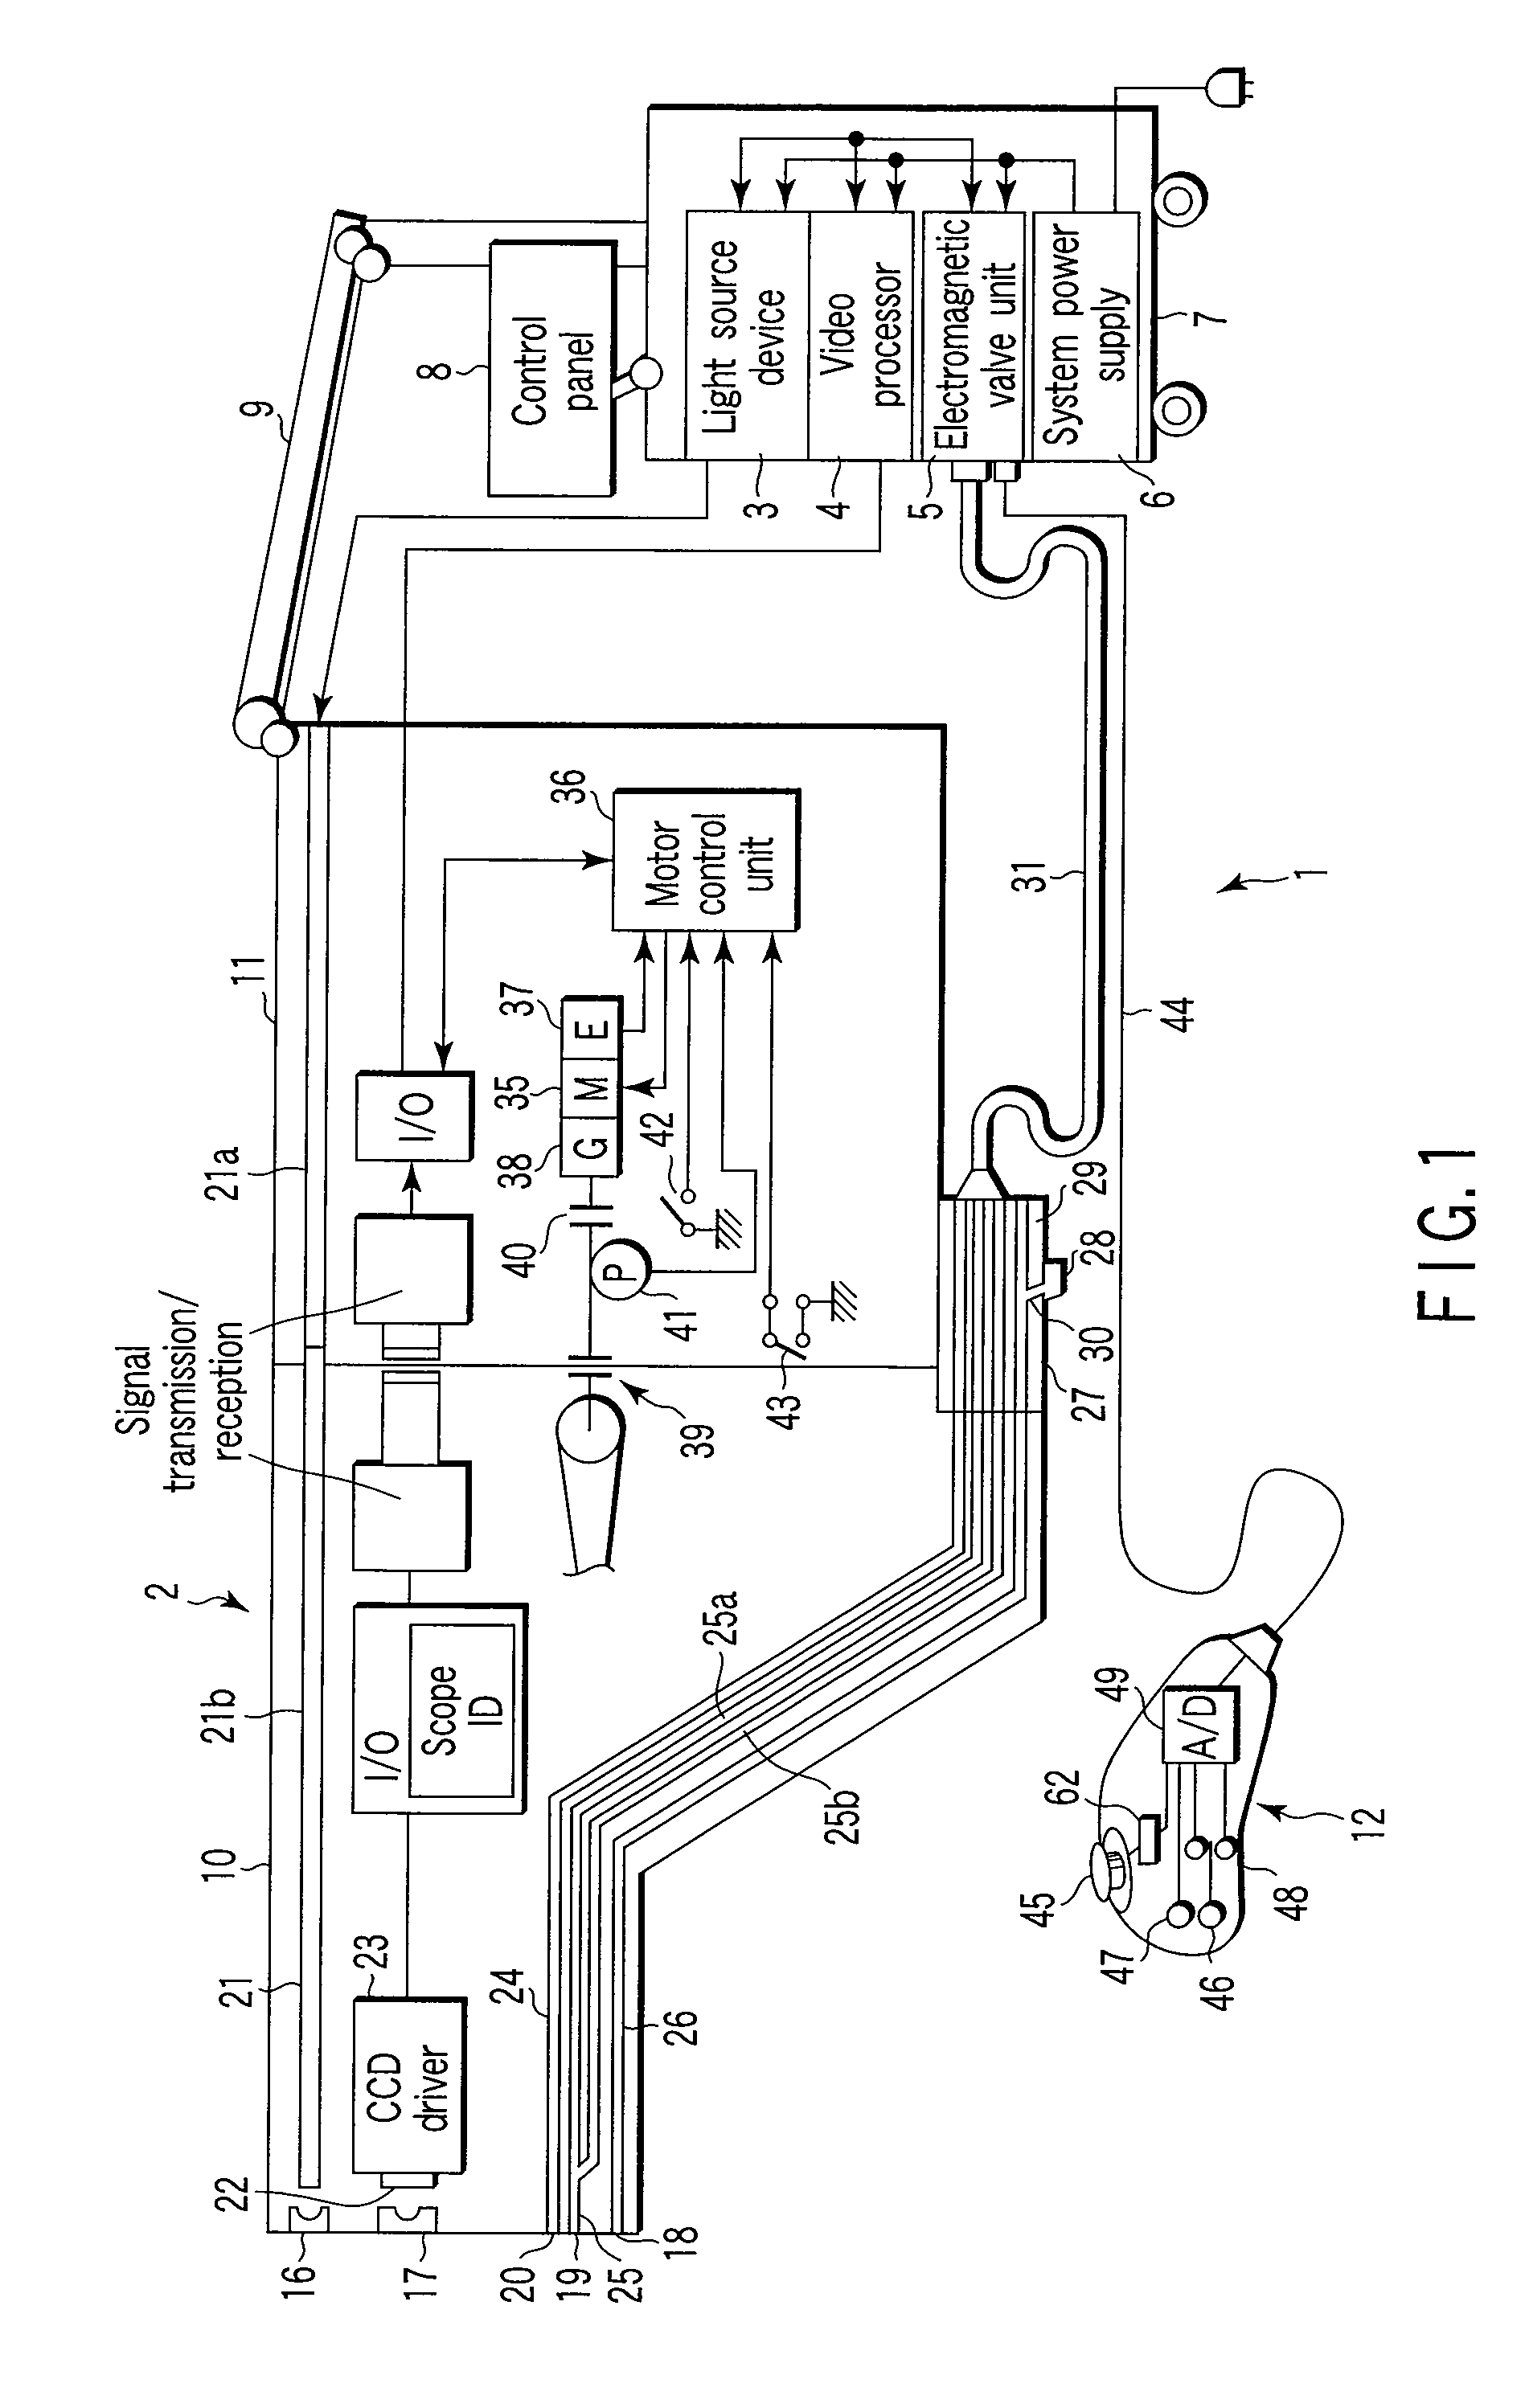 Operation device and bending operation device of endoscope